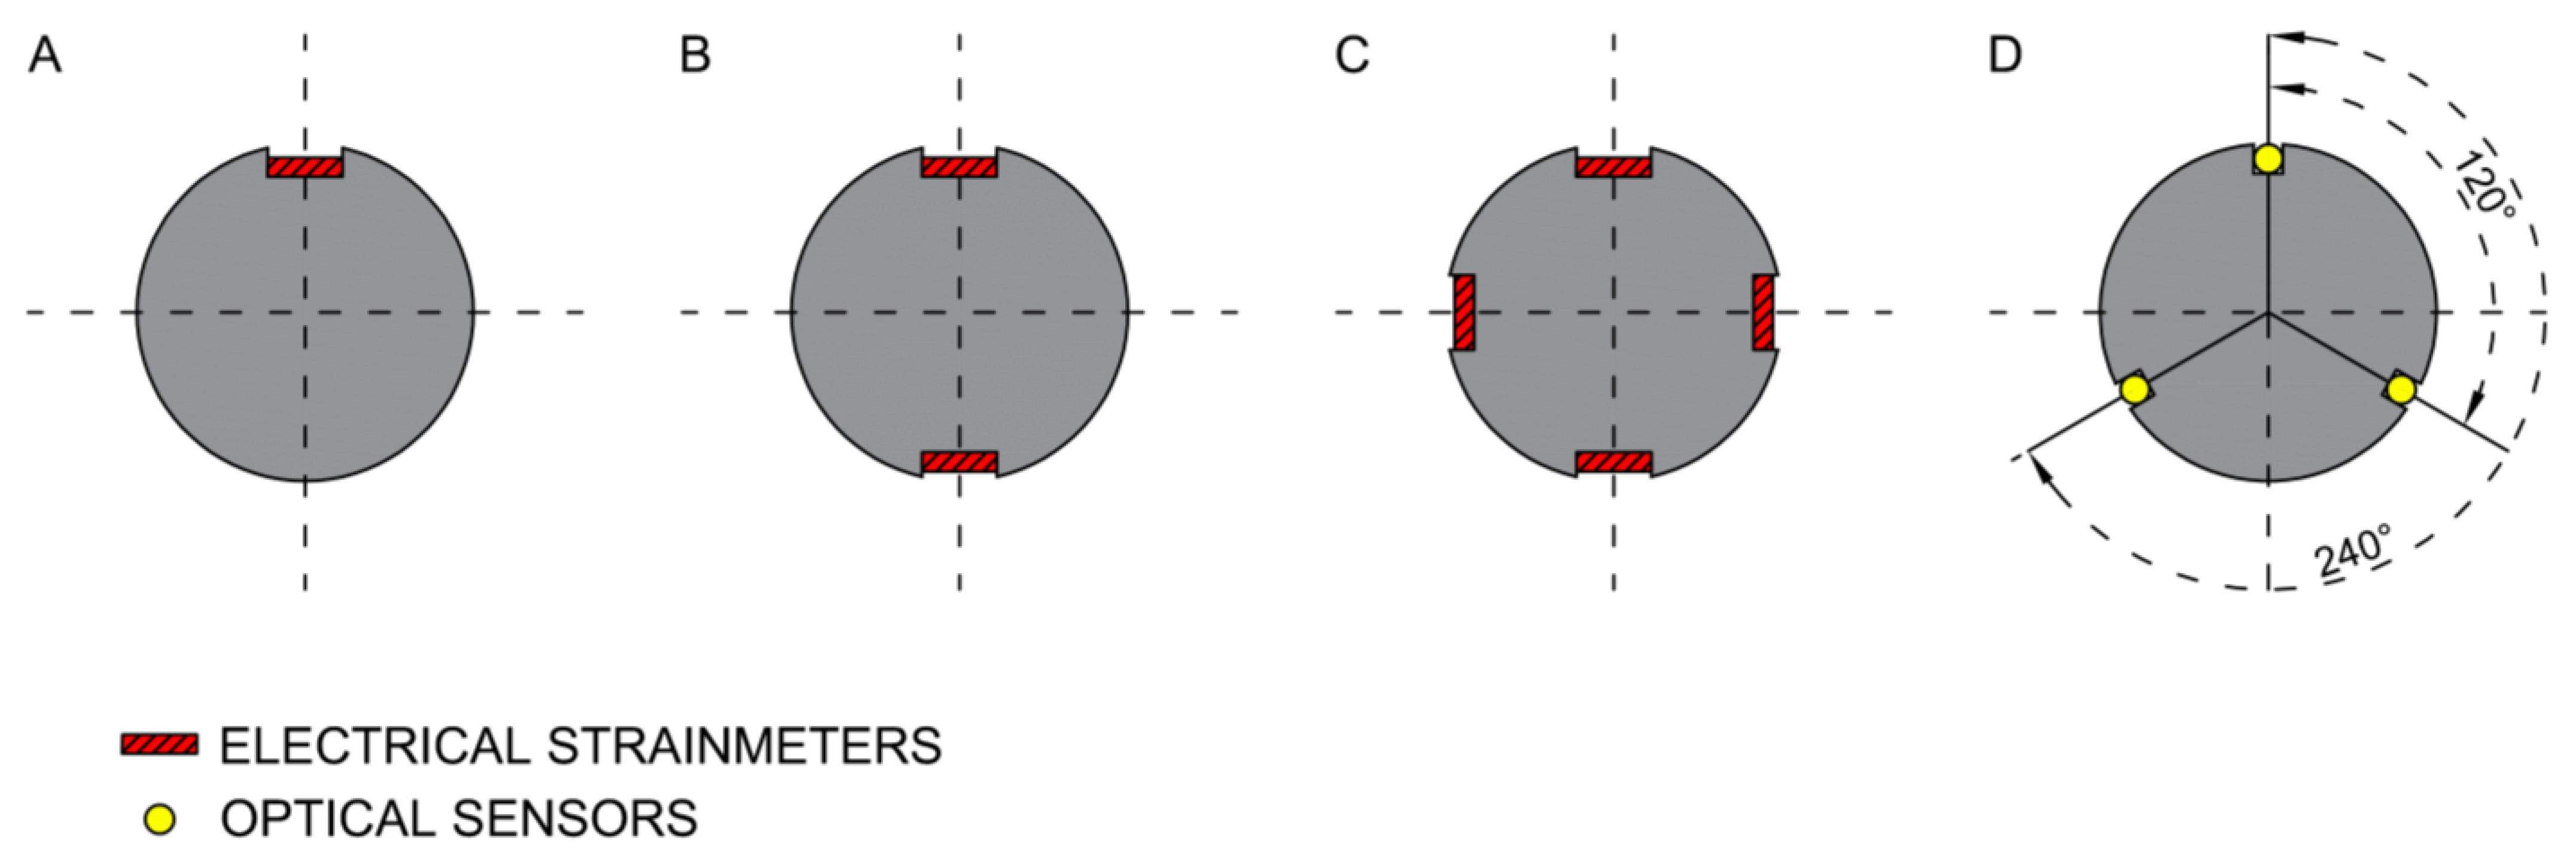 Joint meters used to measure(a) horizontal deformations, and (b